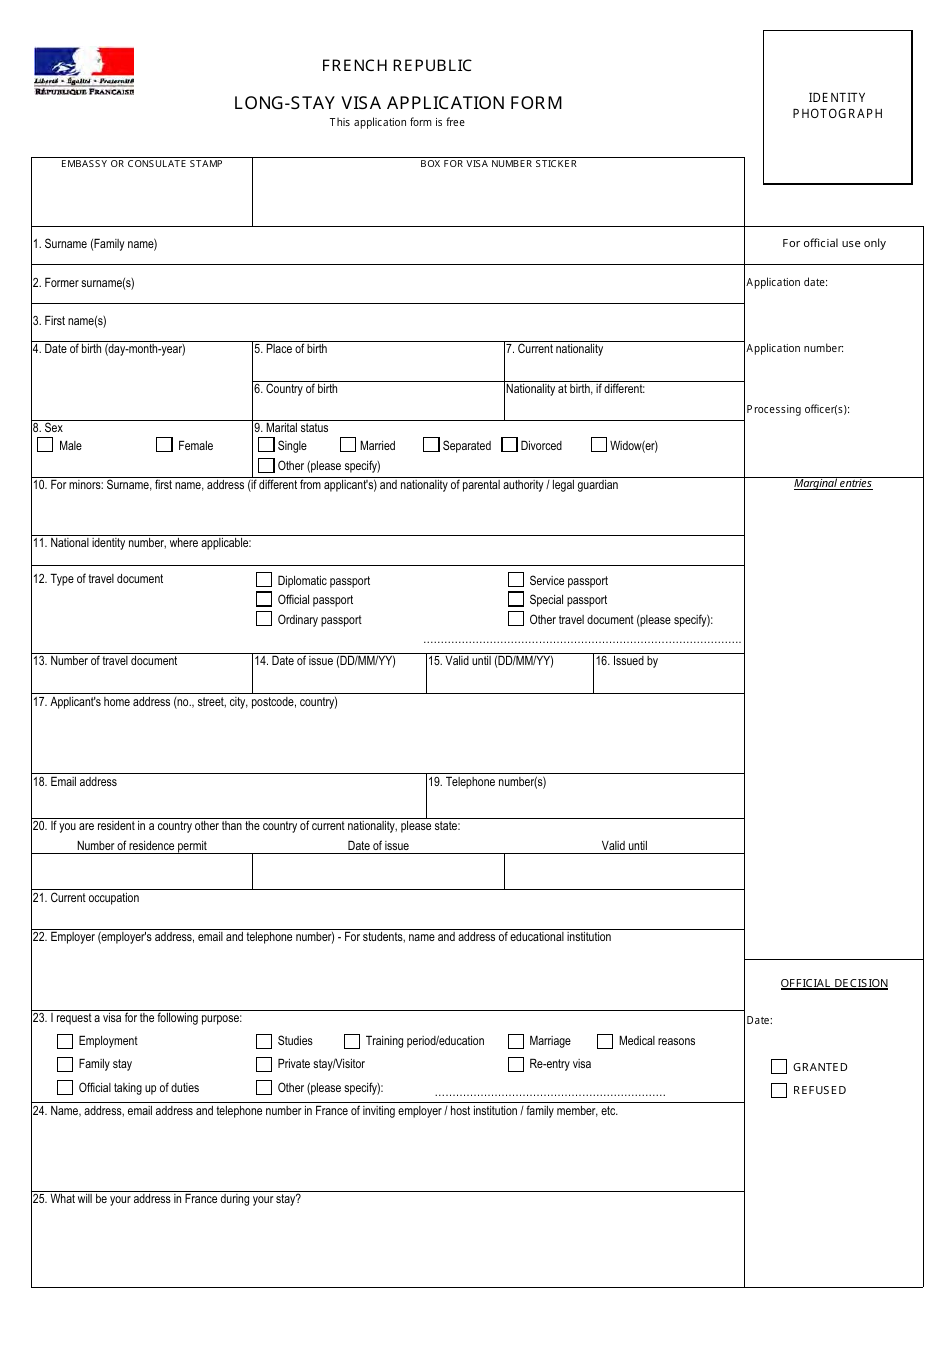 French Republic Long-Stay Visa Application Form, Page 1